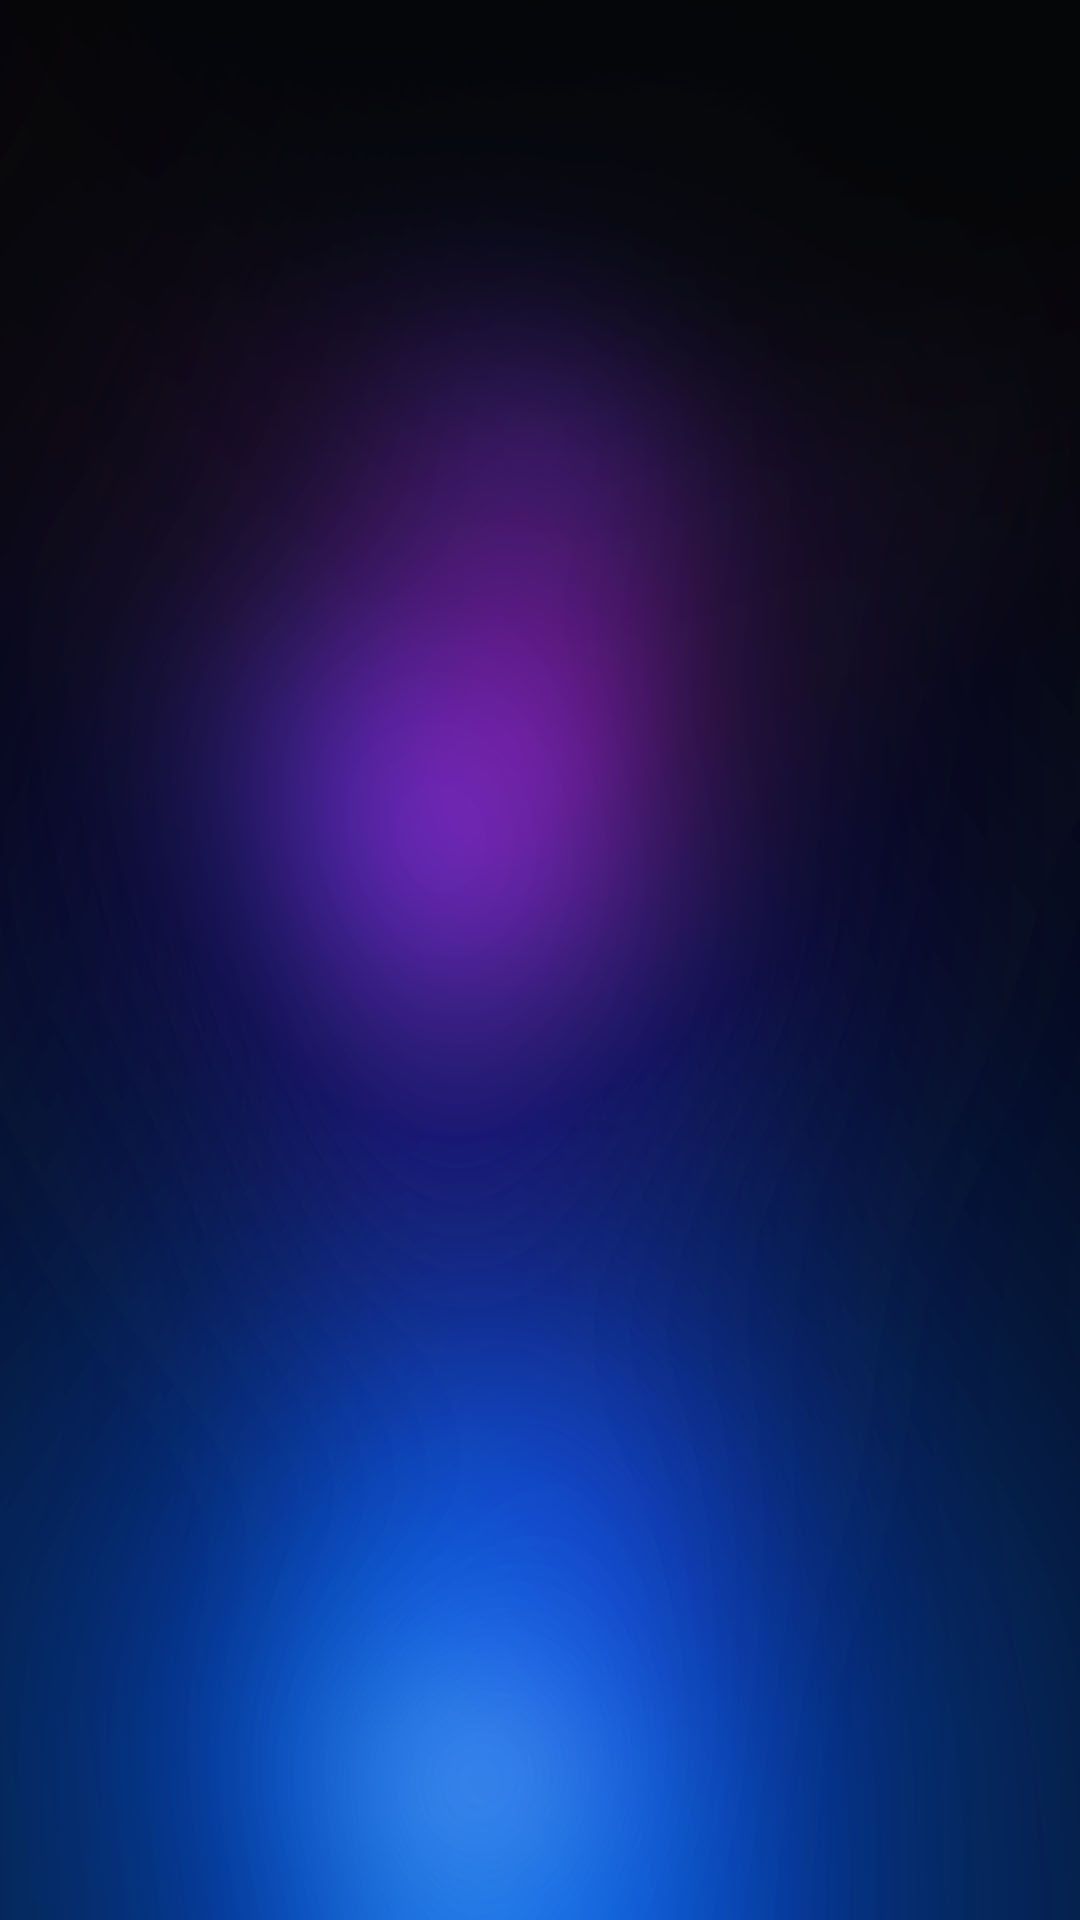 Free download Purple Blue Gradient Samsung Android Wallpaper